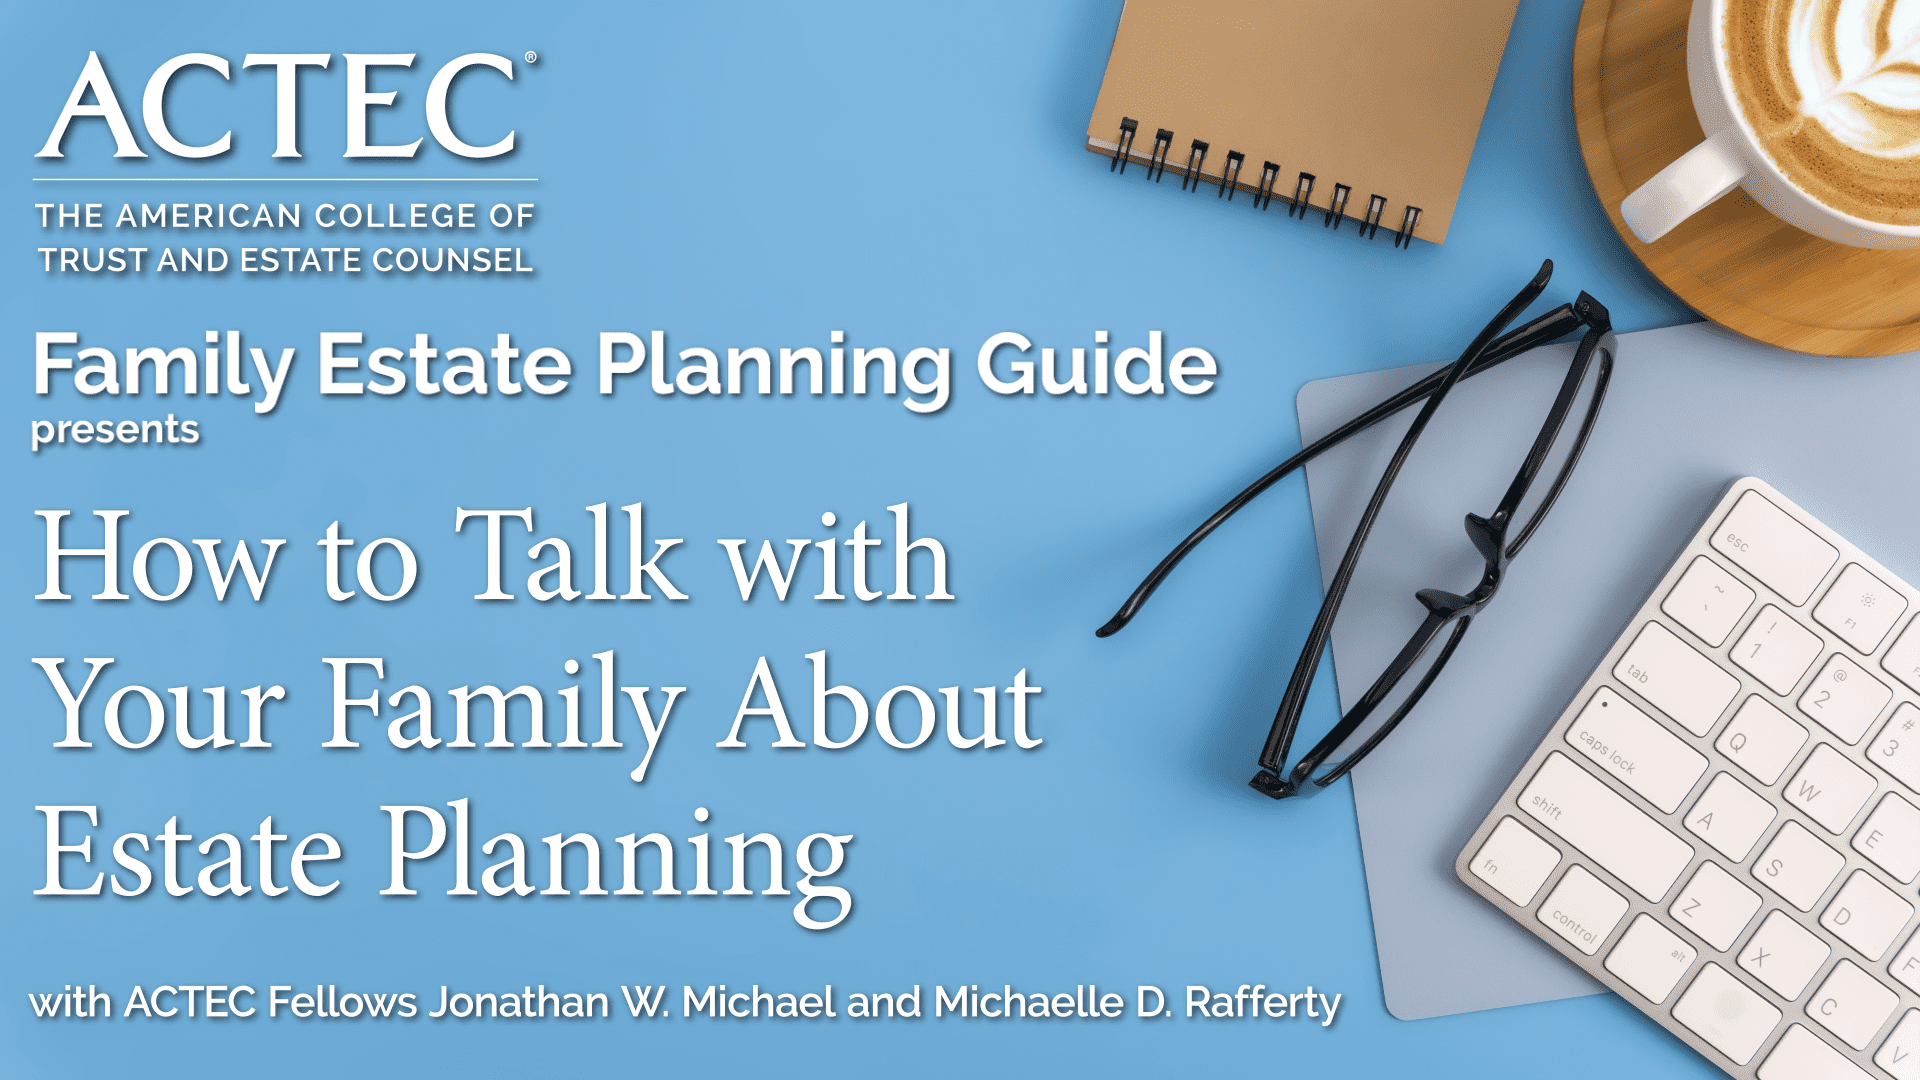 How to Talk with Your Family About Estate Planning